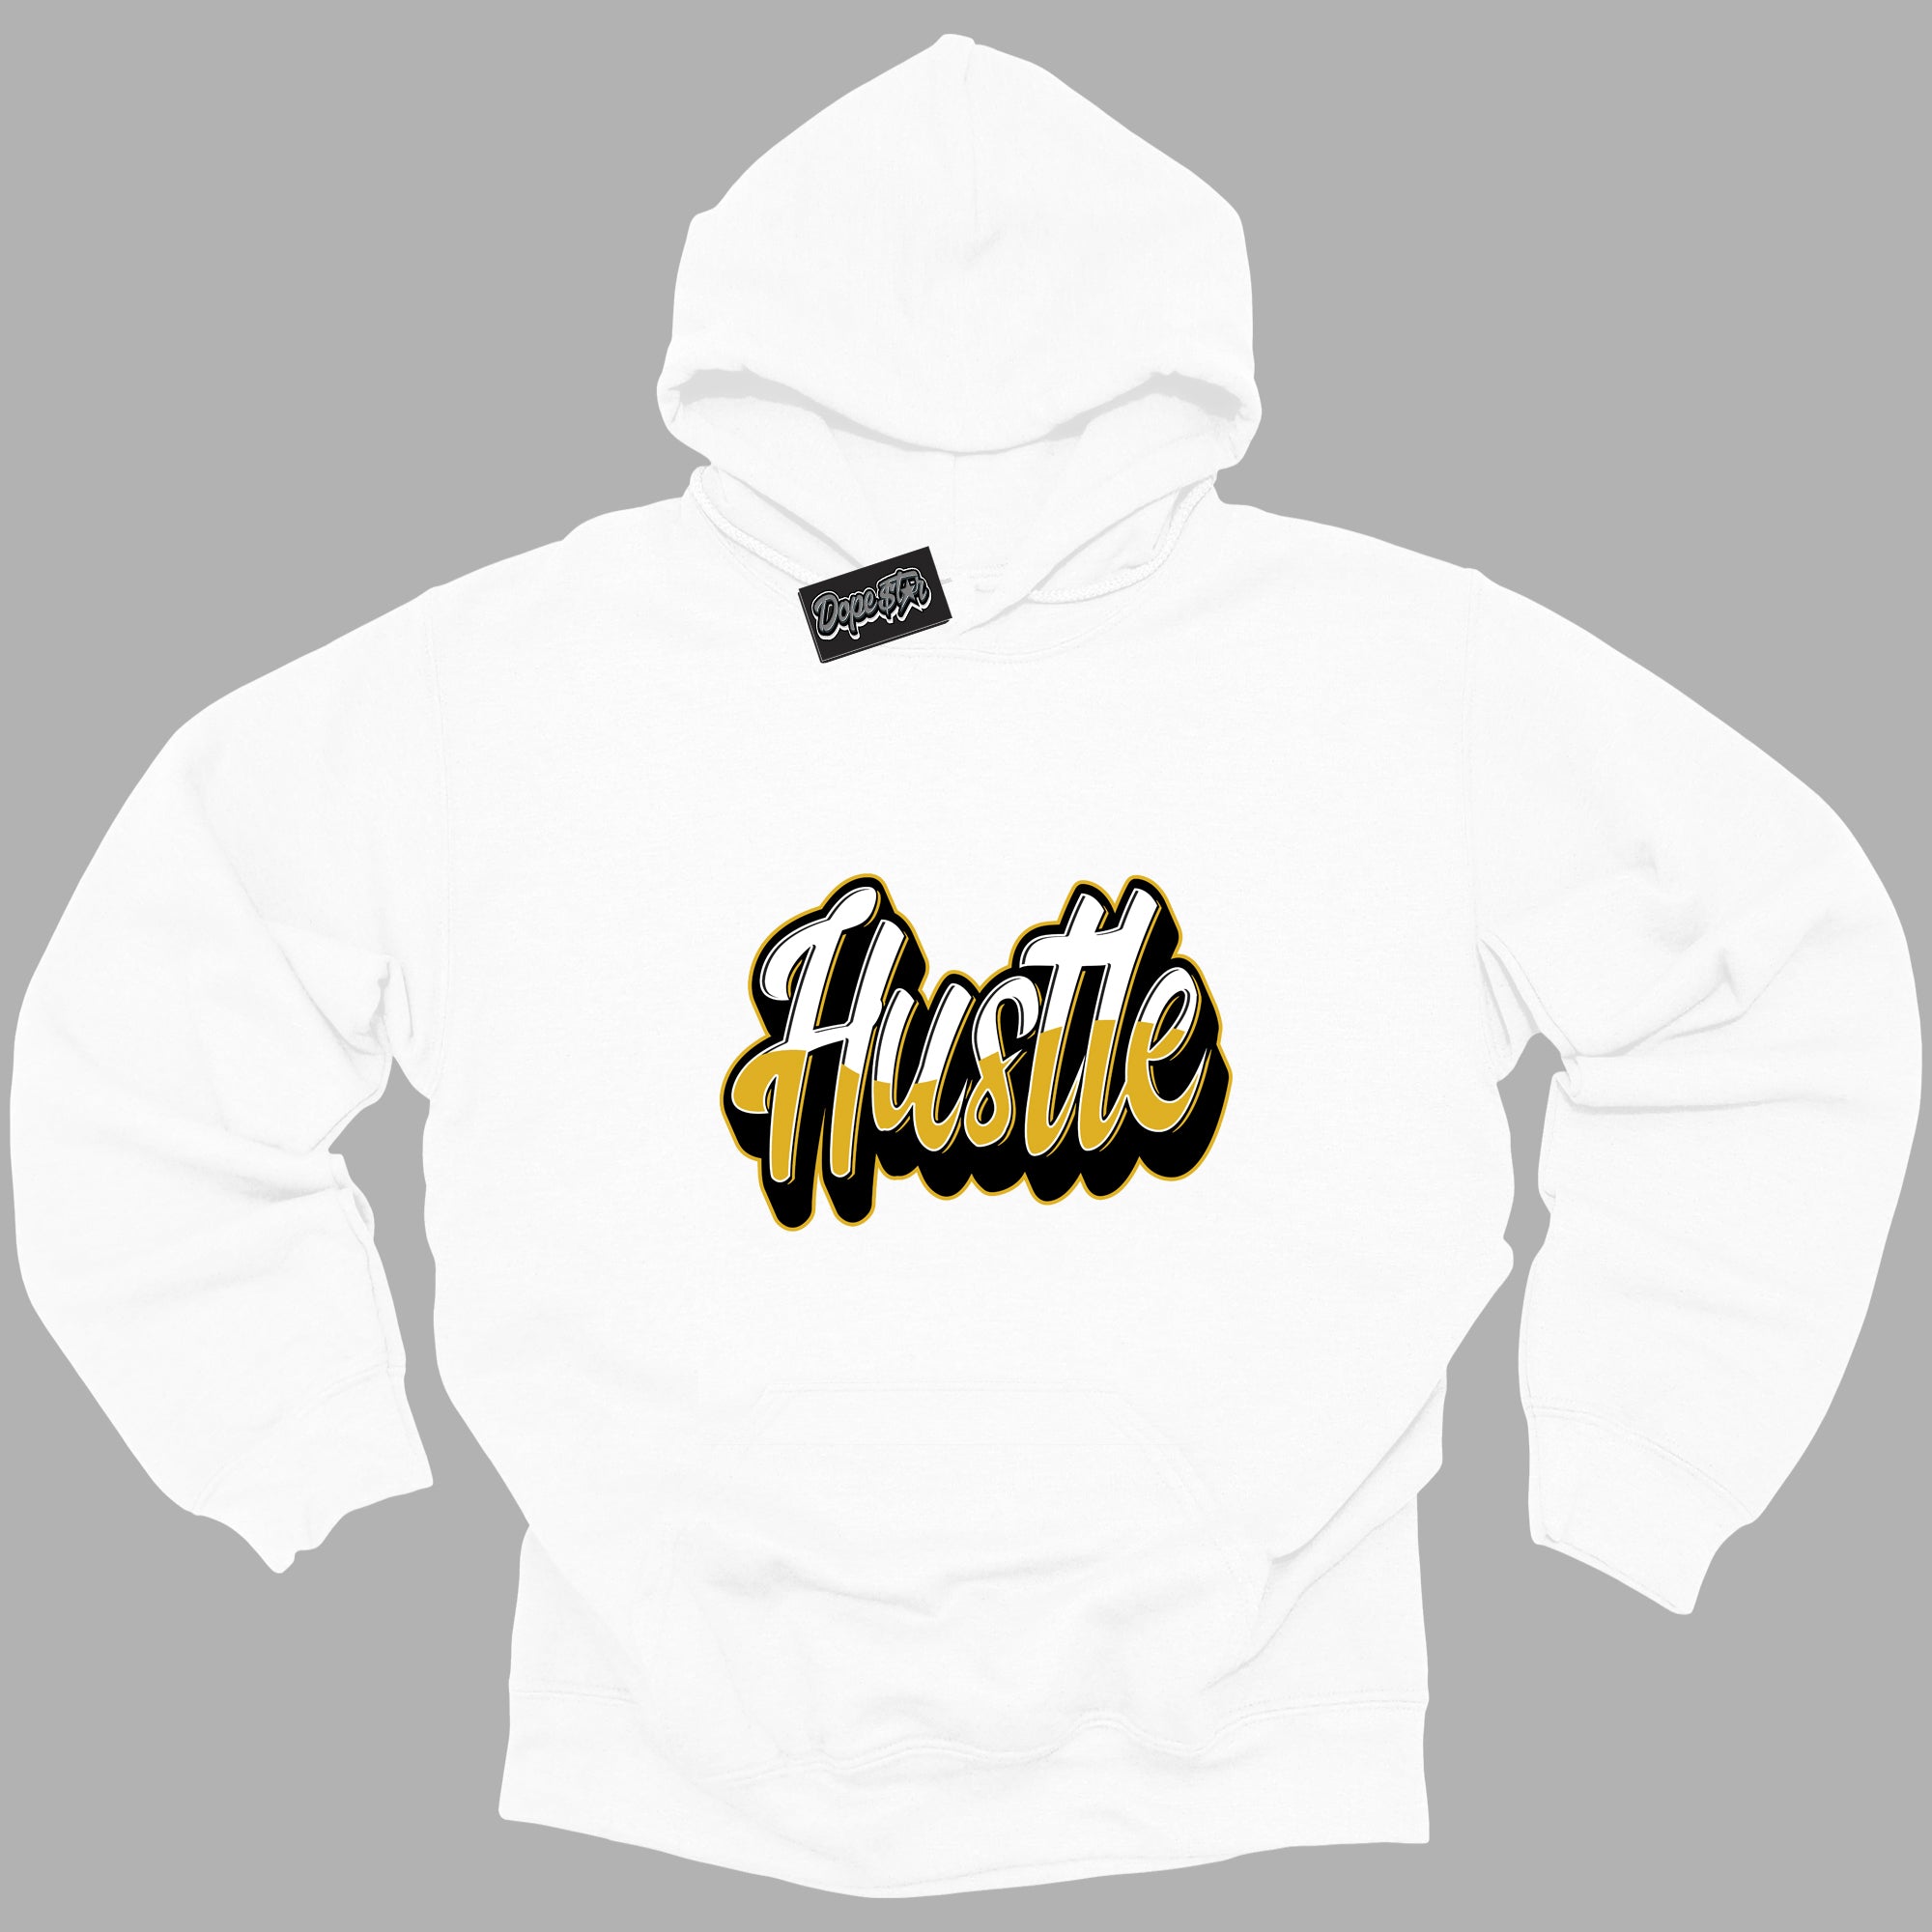 Cool White Hoodie with “ Hustle ”  design that Perfectly Matches Yellow Ochre 6s Sneakers.